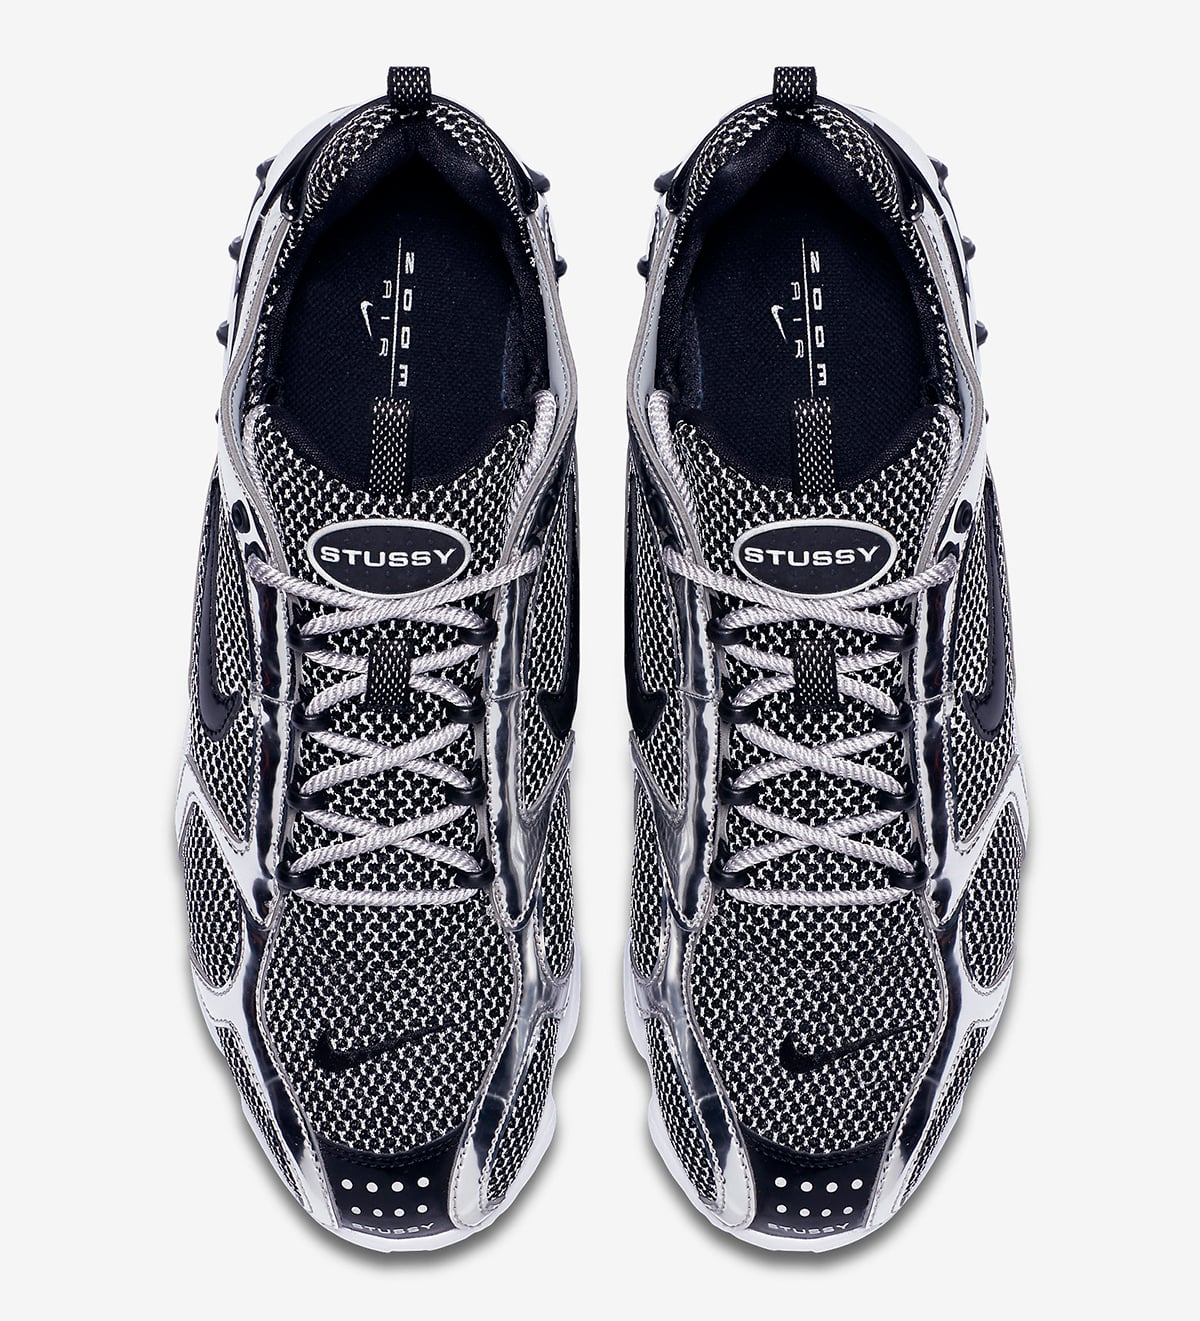 Where to Buy the Stussy x Nike Air Zoom Spiridon Caged Collab | HOUSE